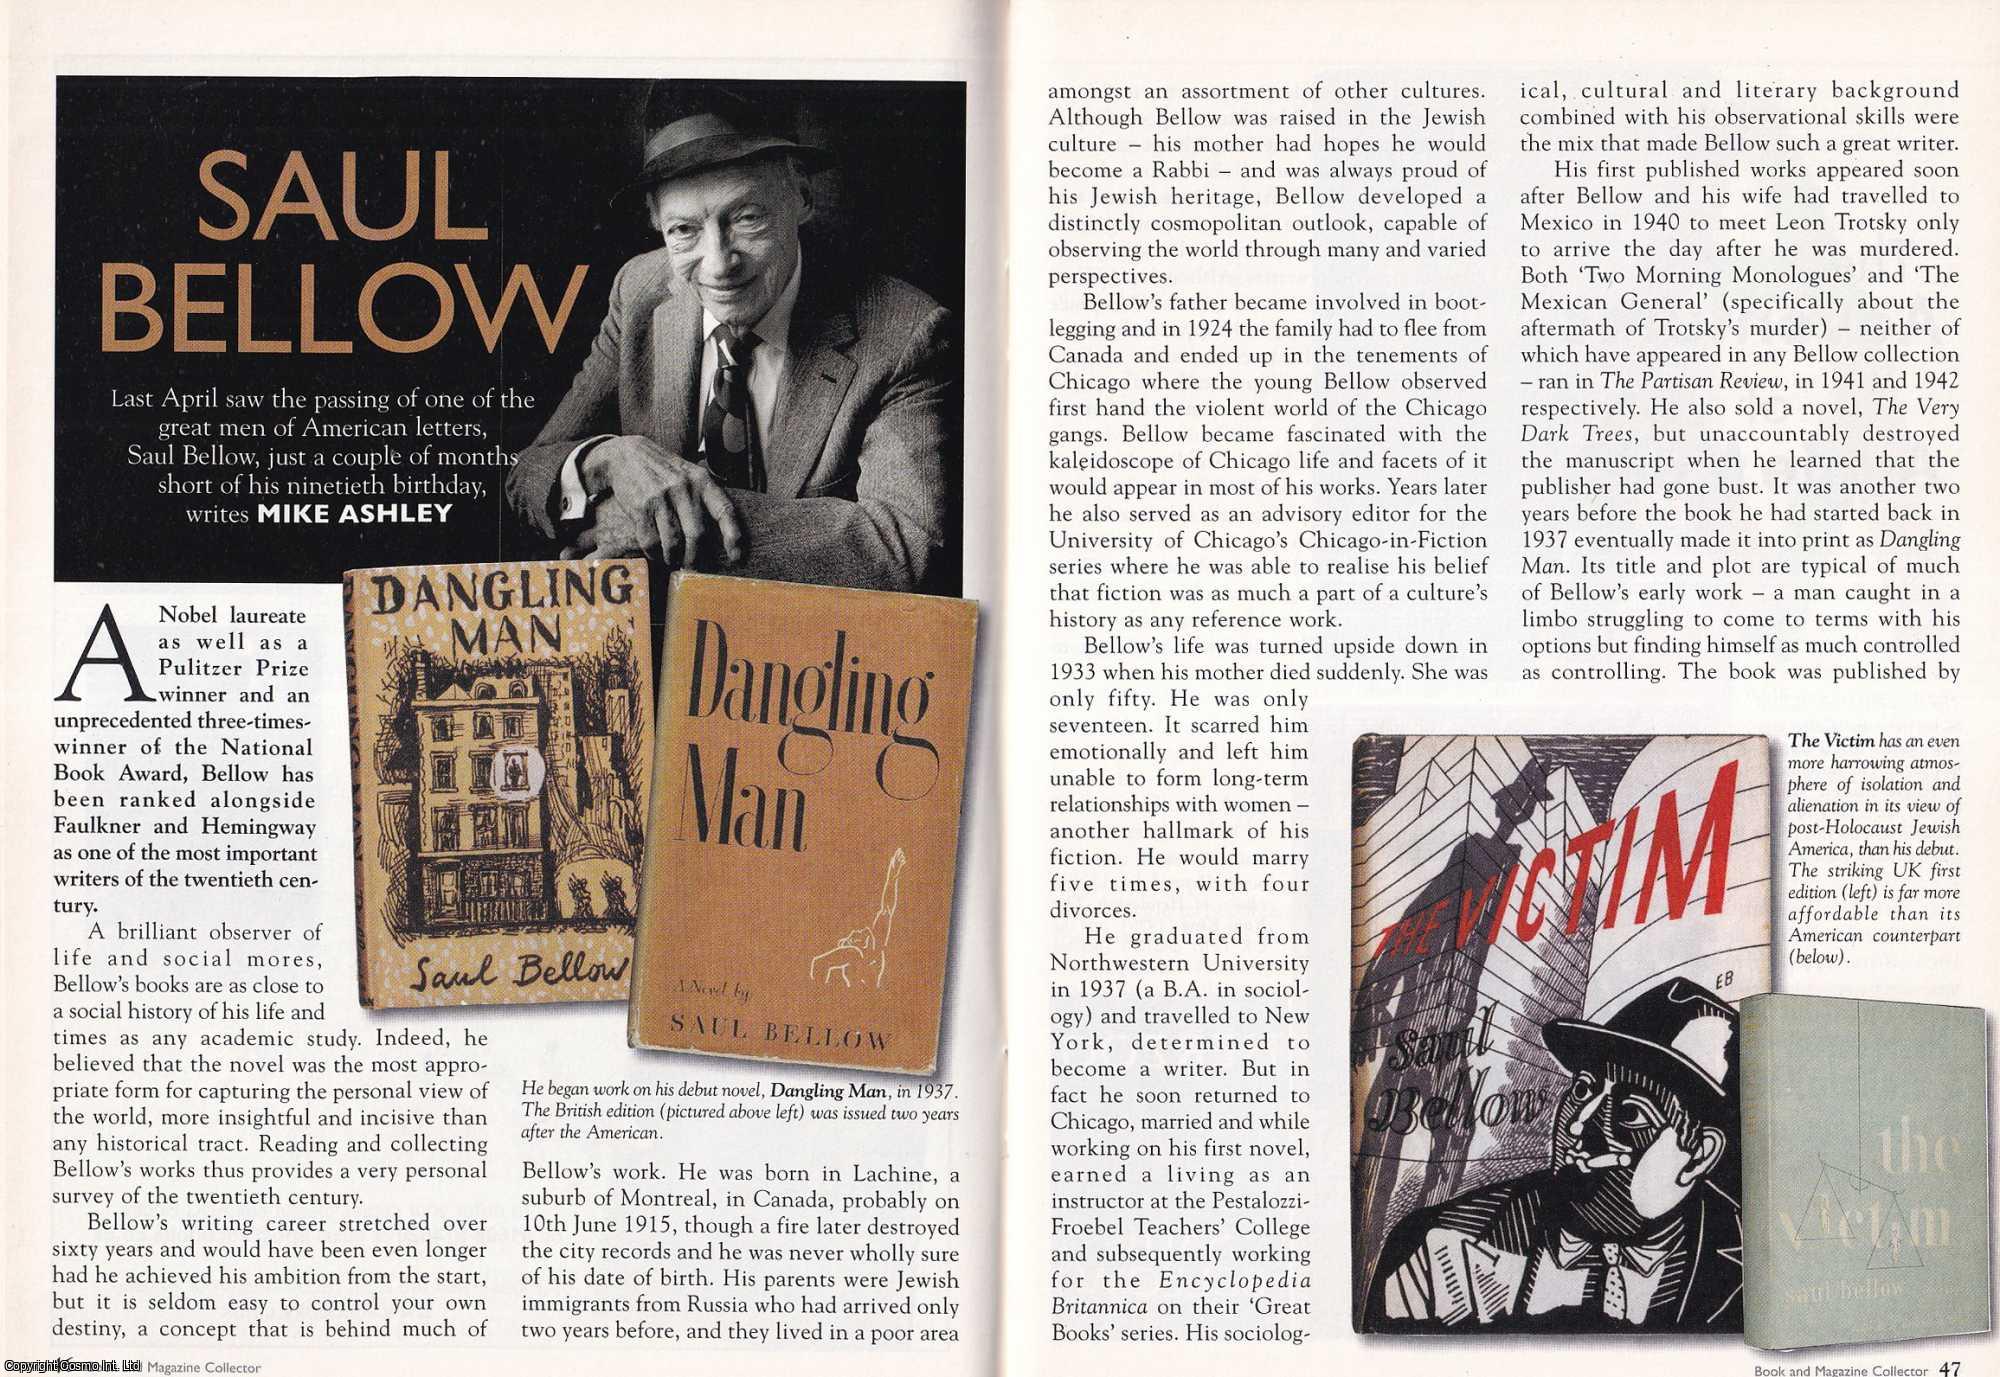 Mike Ashley - Saul Bellow. One of The Great Men of American Letters. This is an original article separated from an issue of The Book & Magazine Collector publication.